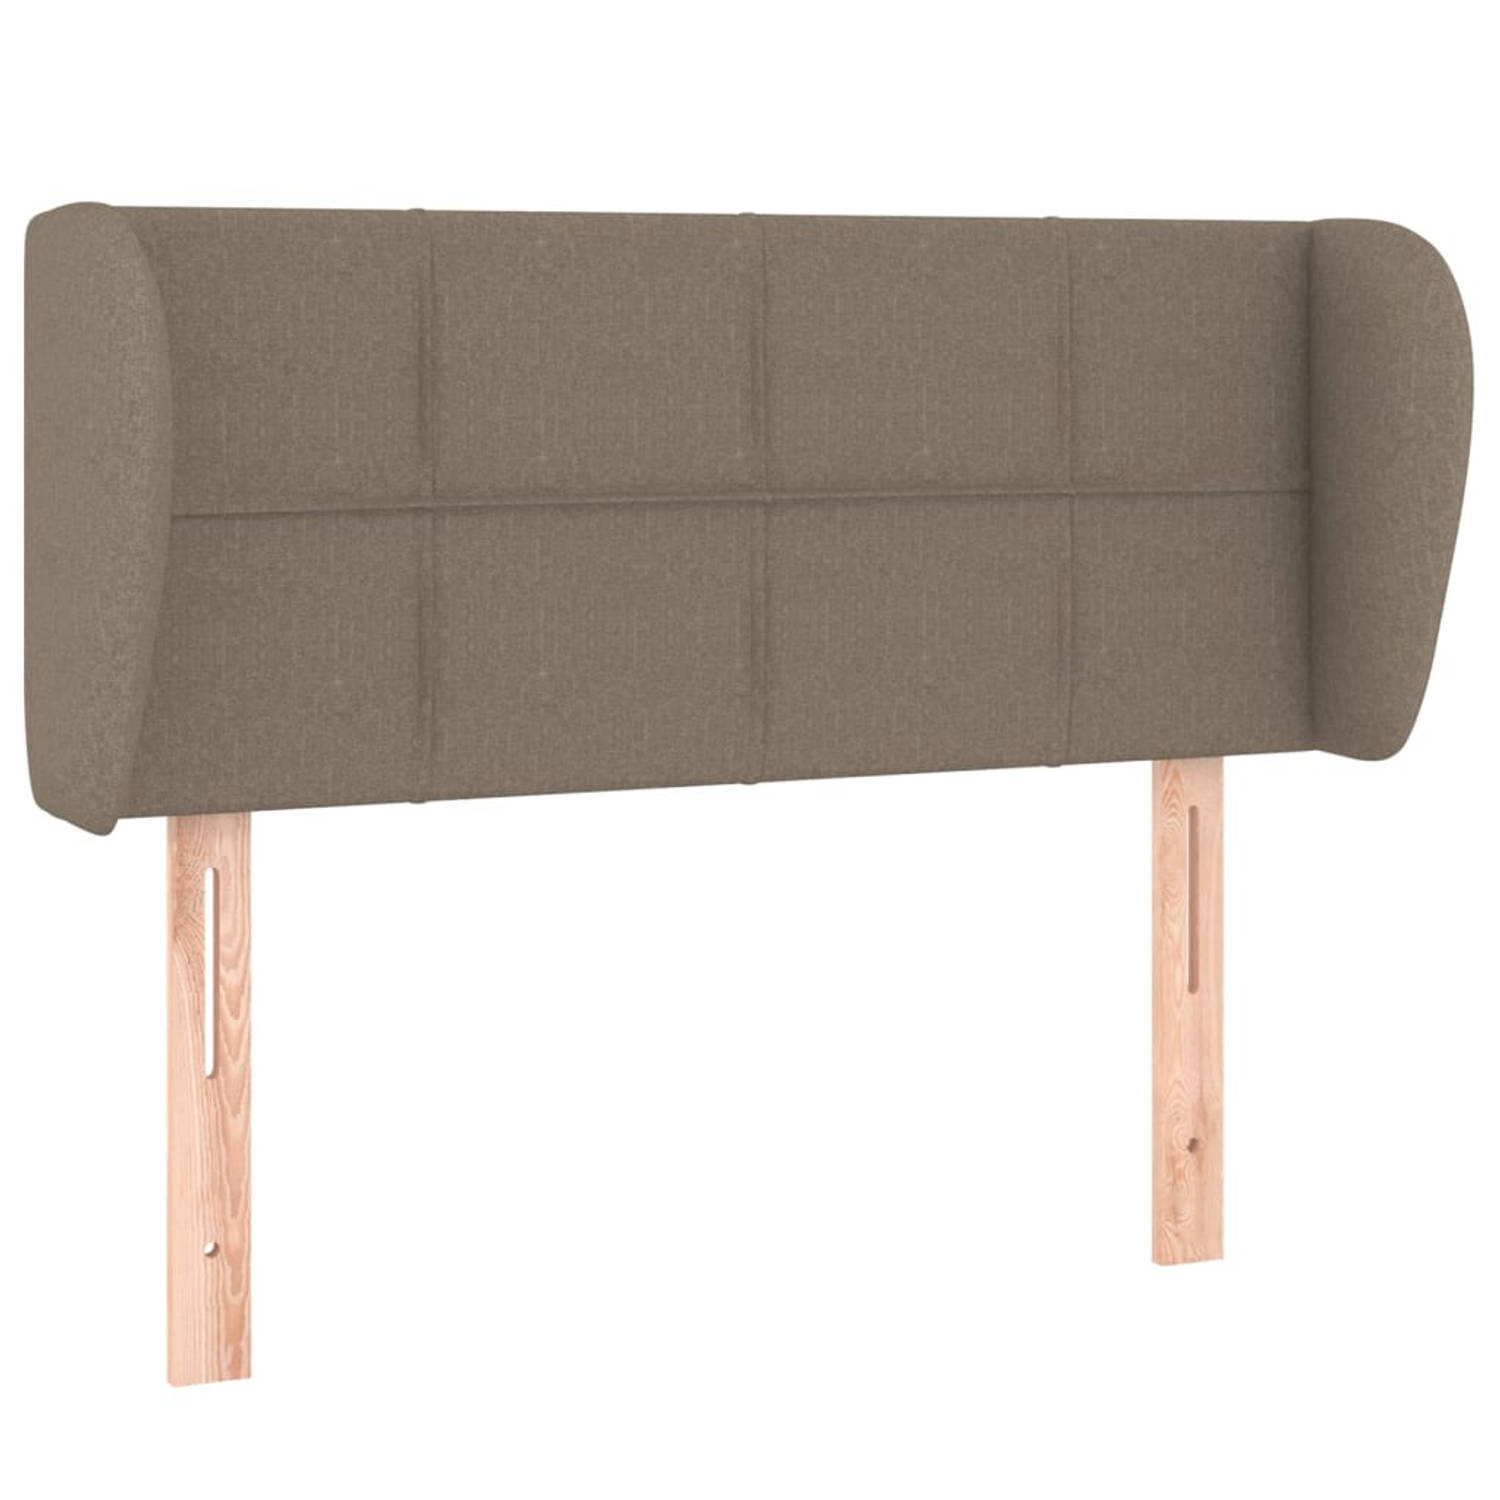 The Living Store Hoofdbord - Bedaccessoires - 83x23x78/88 cm - Taupe